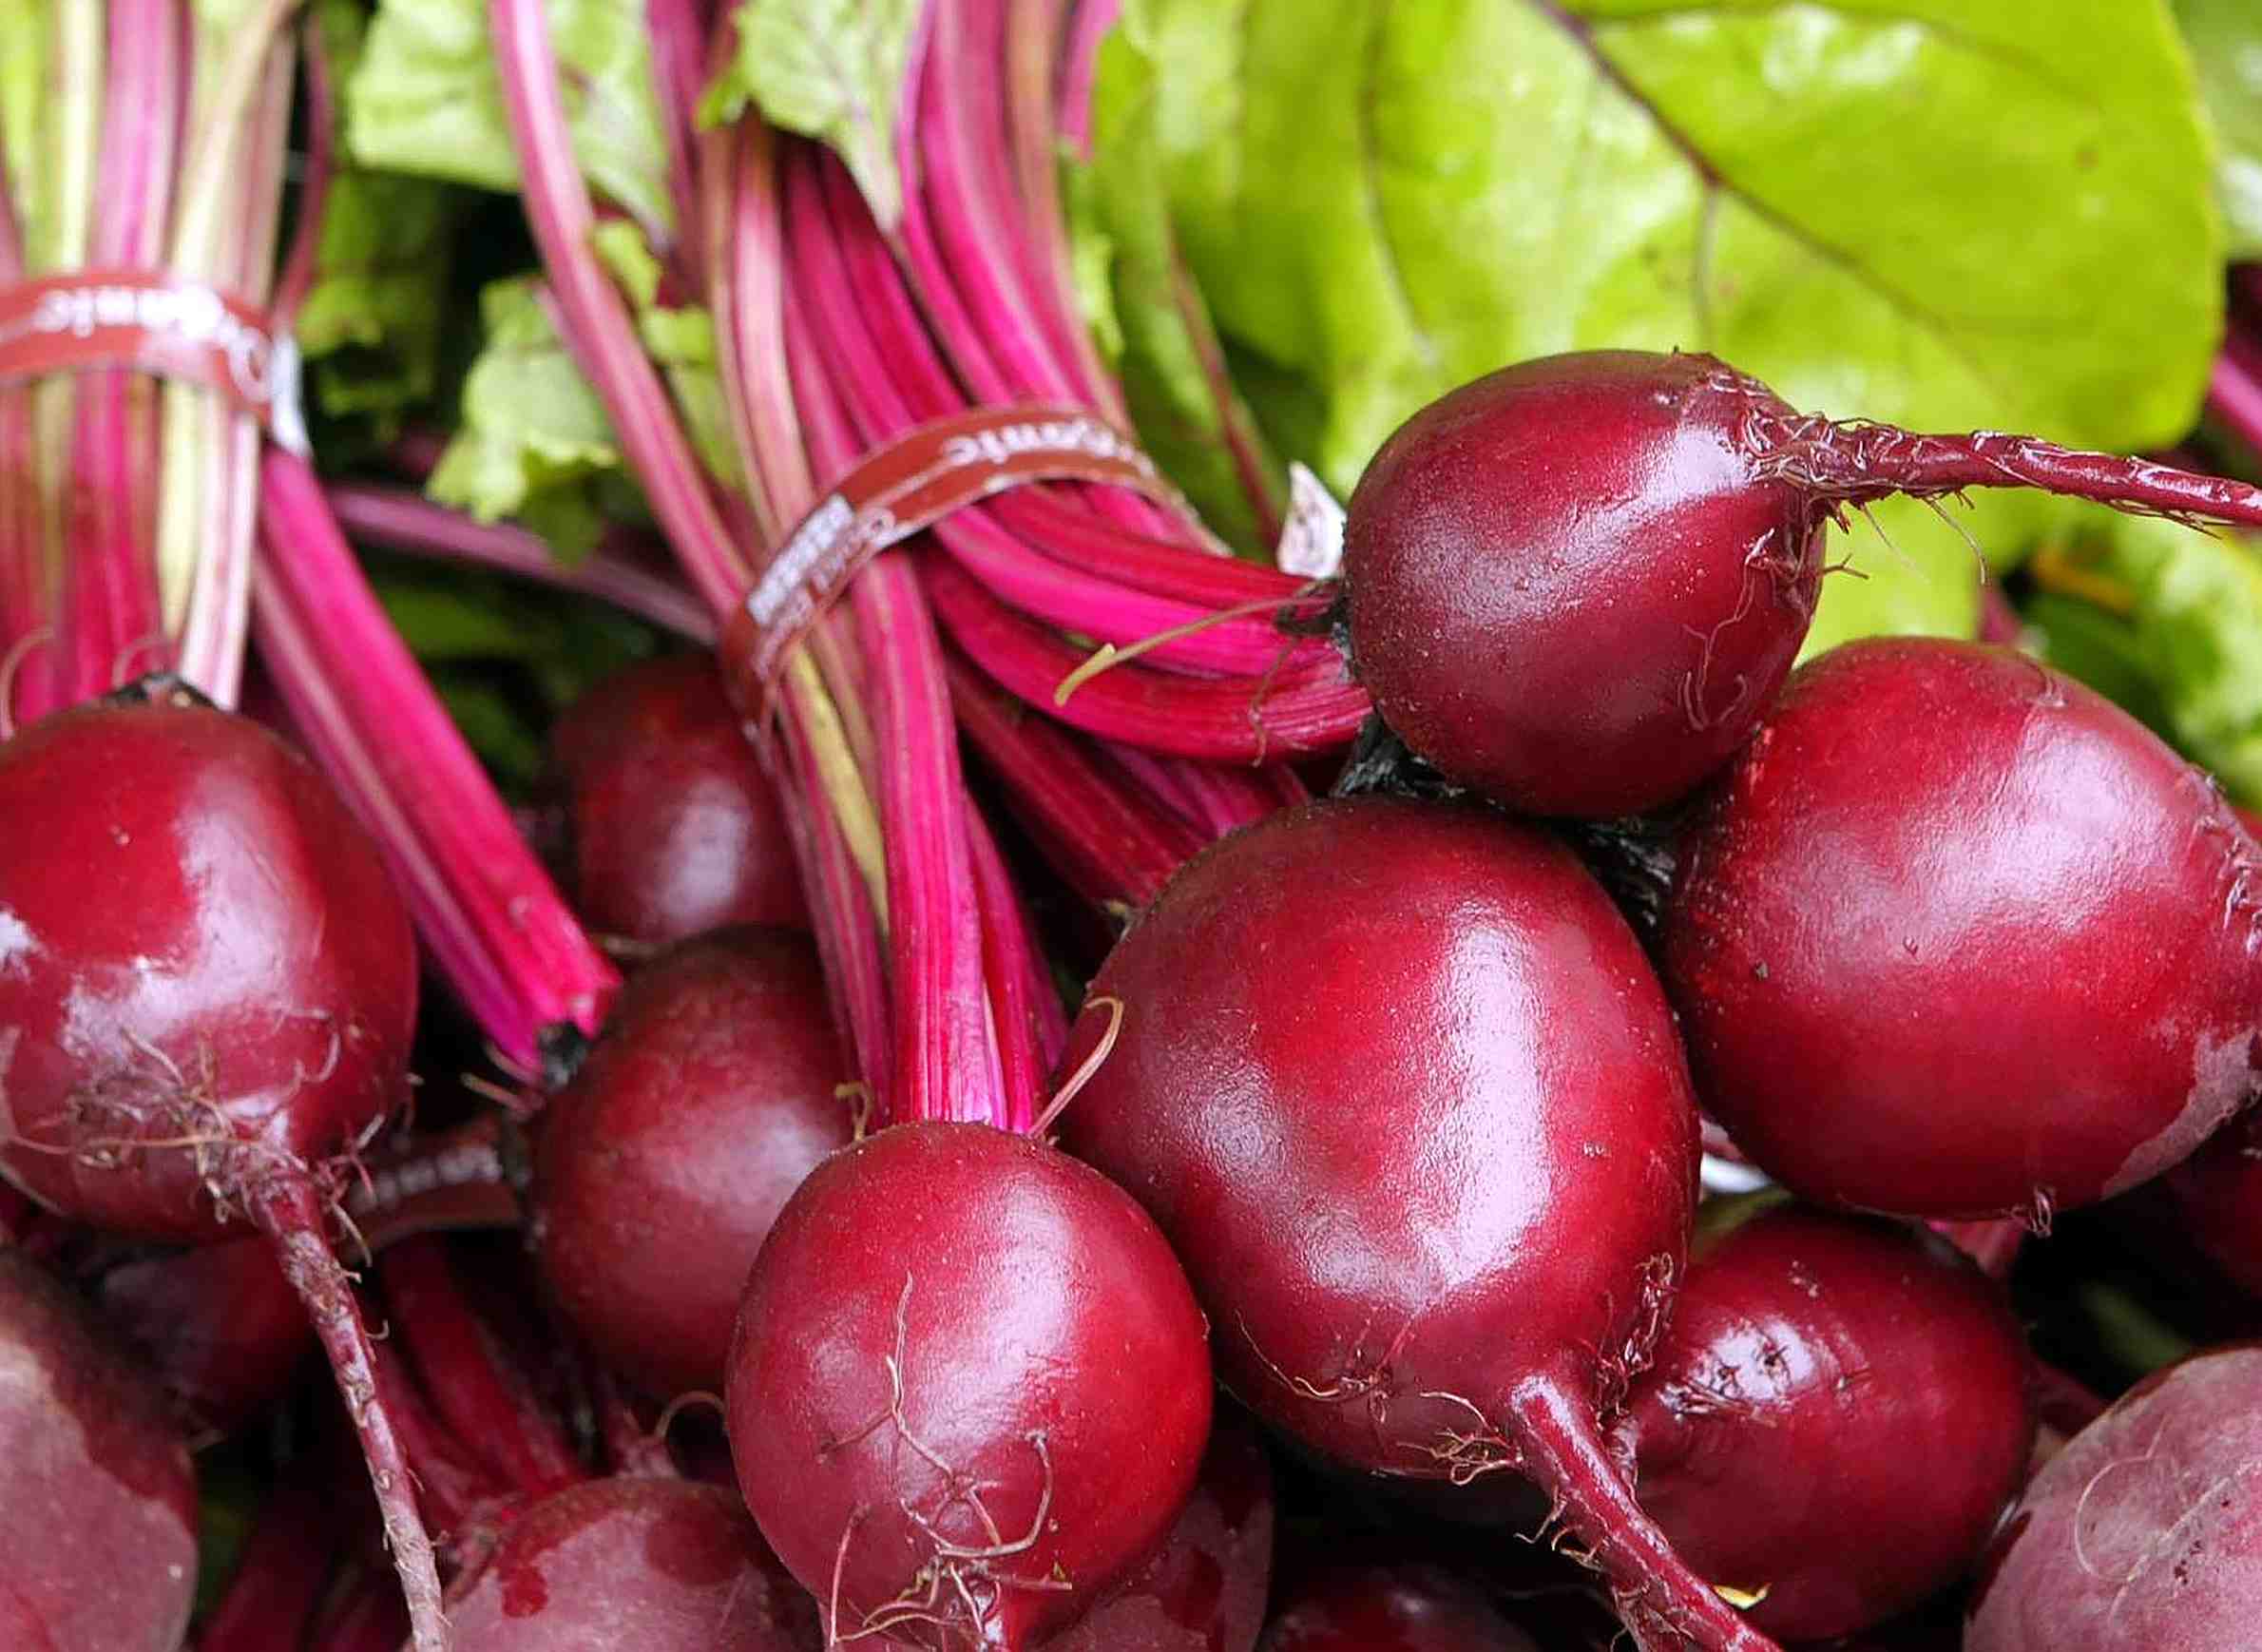 Can new, sweeter beets defeat stigmas? Wisconsin breeders hope so